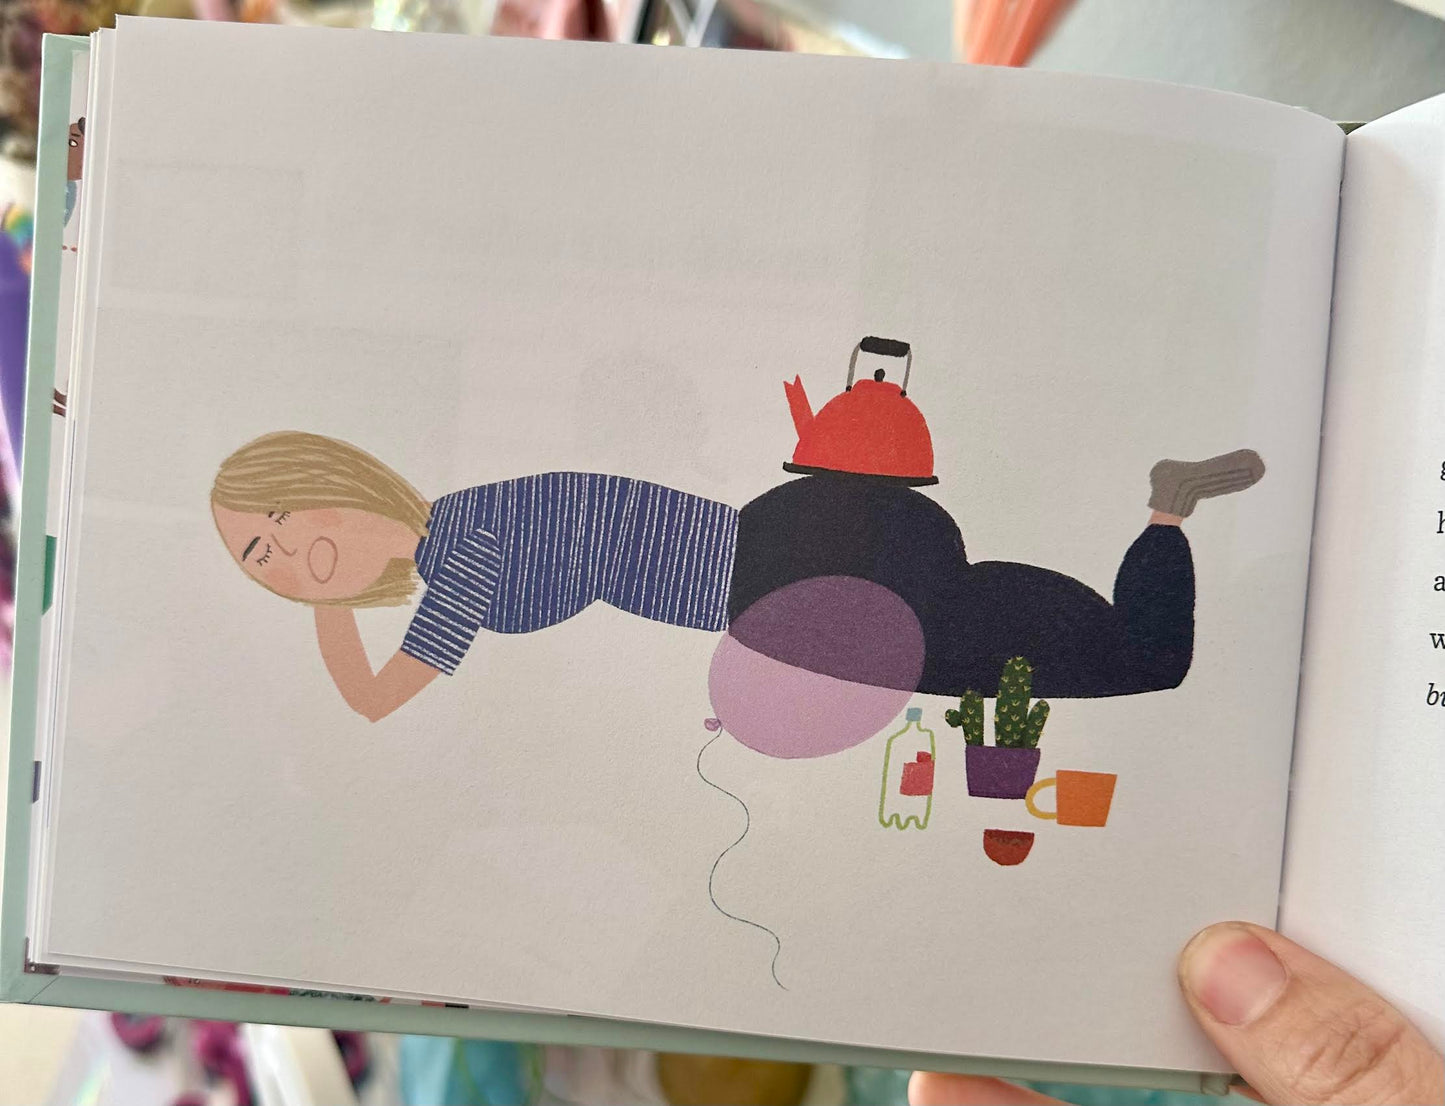 Horizontal Parenting: How to Entertain Your Kid While Lying Down Book